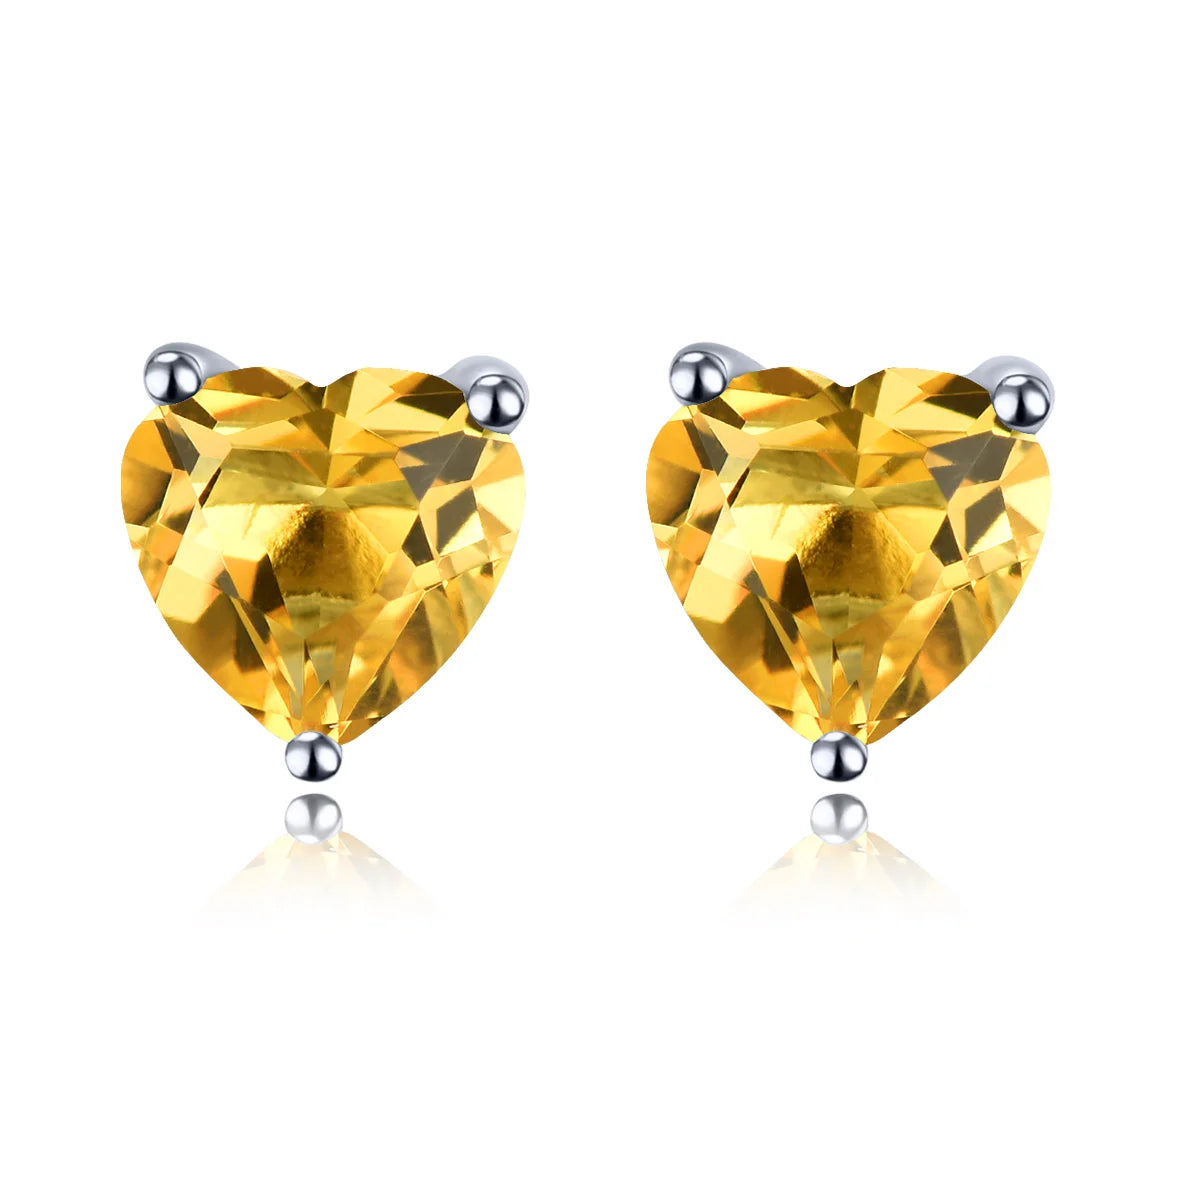 Natural Peridot Sterling Silver Stud Earring 1.6 Carats Genuine Gemstone Romantic Heart Design Casual Jewelry Birthday Gifts Natural Citrine